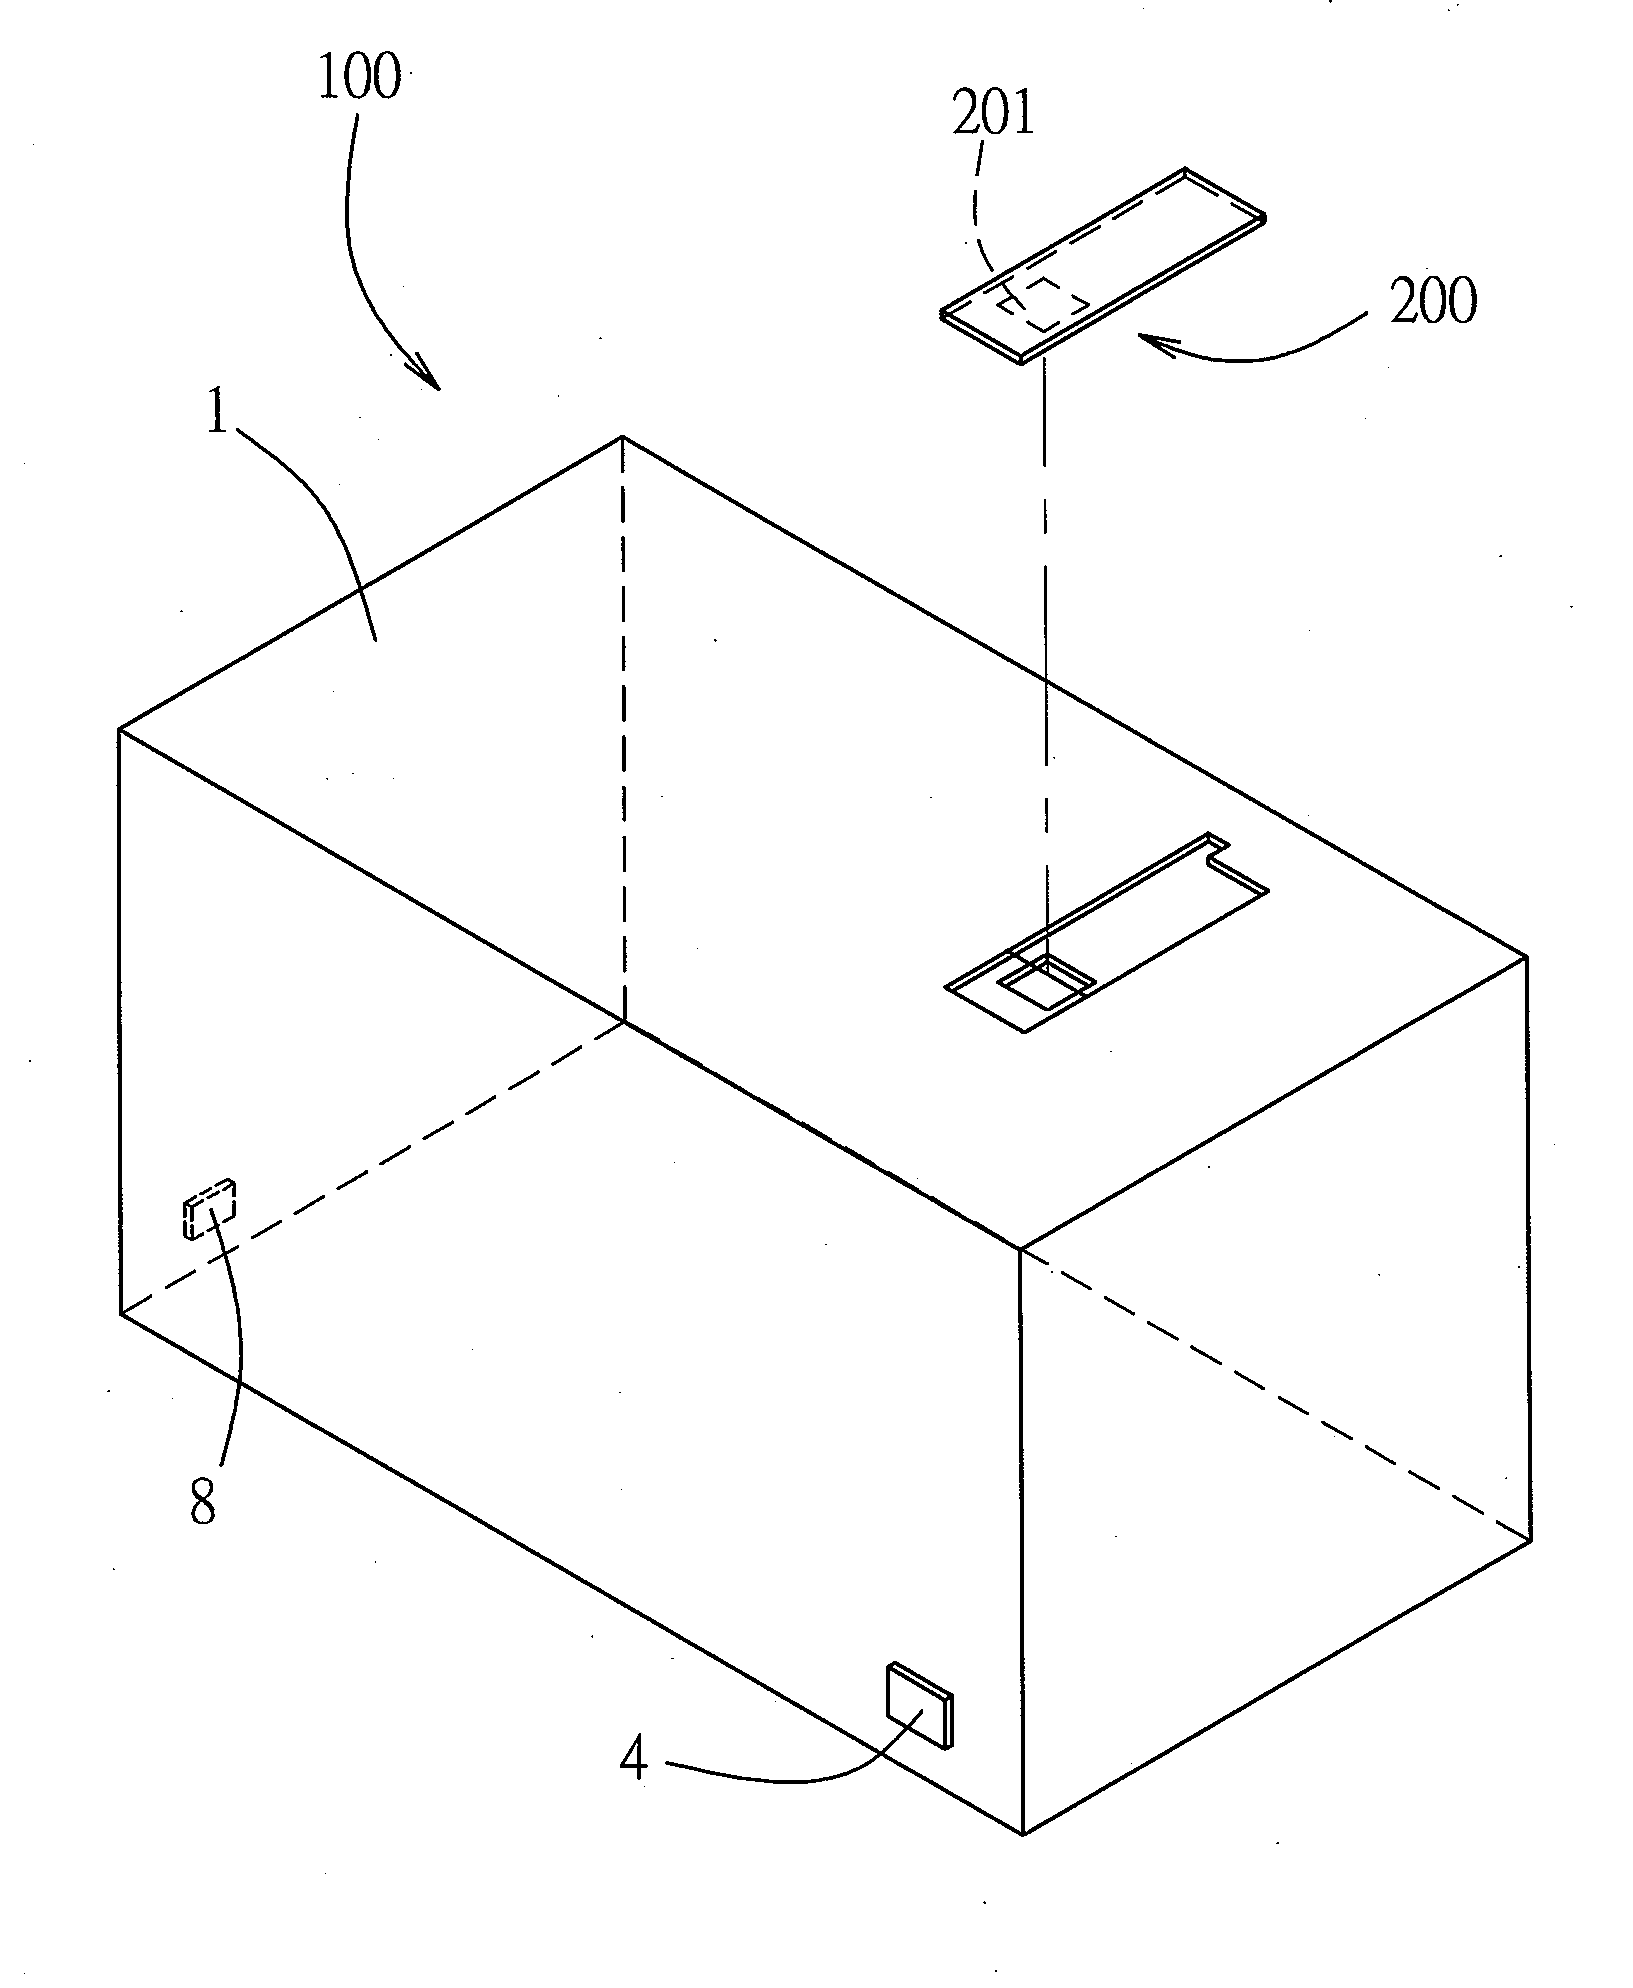 Millimeter wave test fixture for an integrated circuit device under test